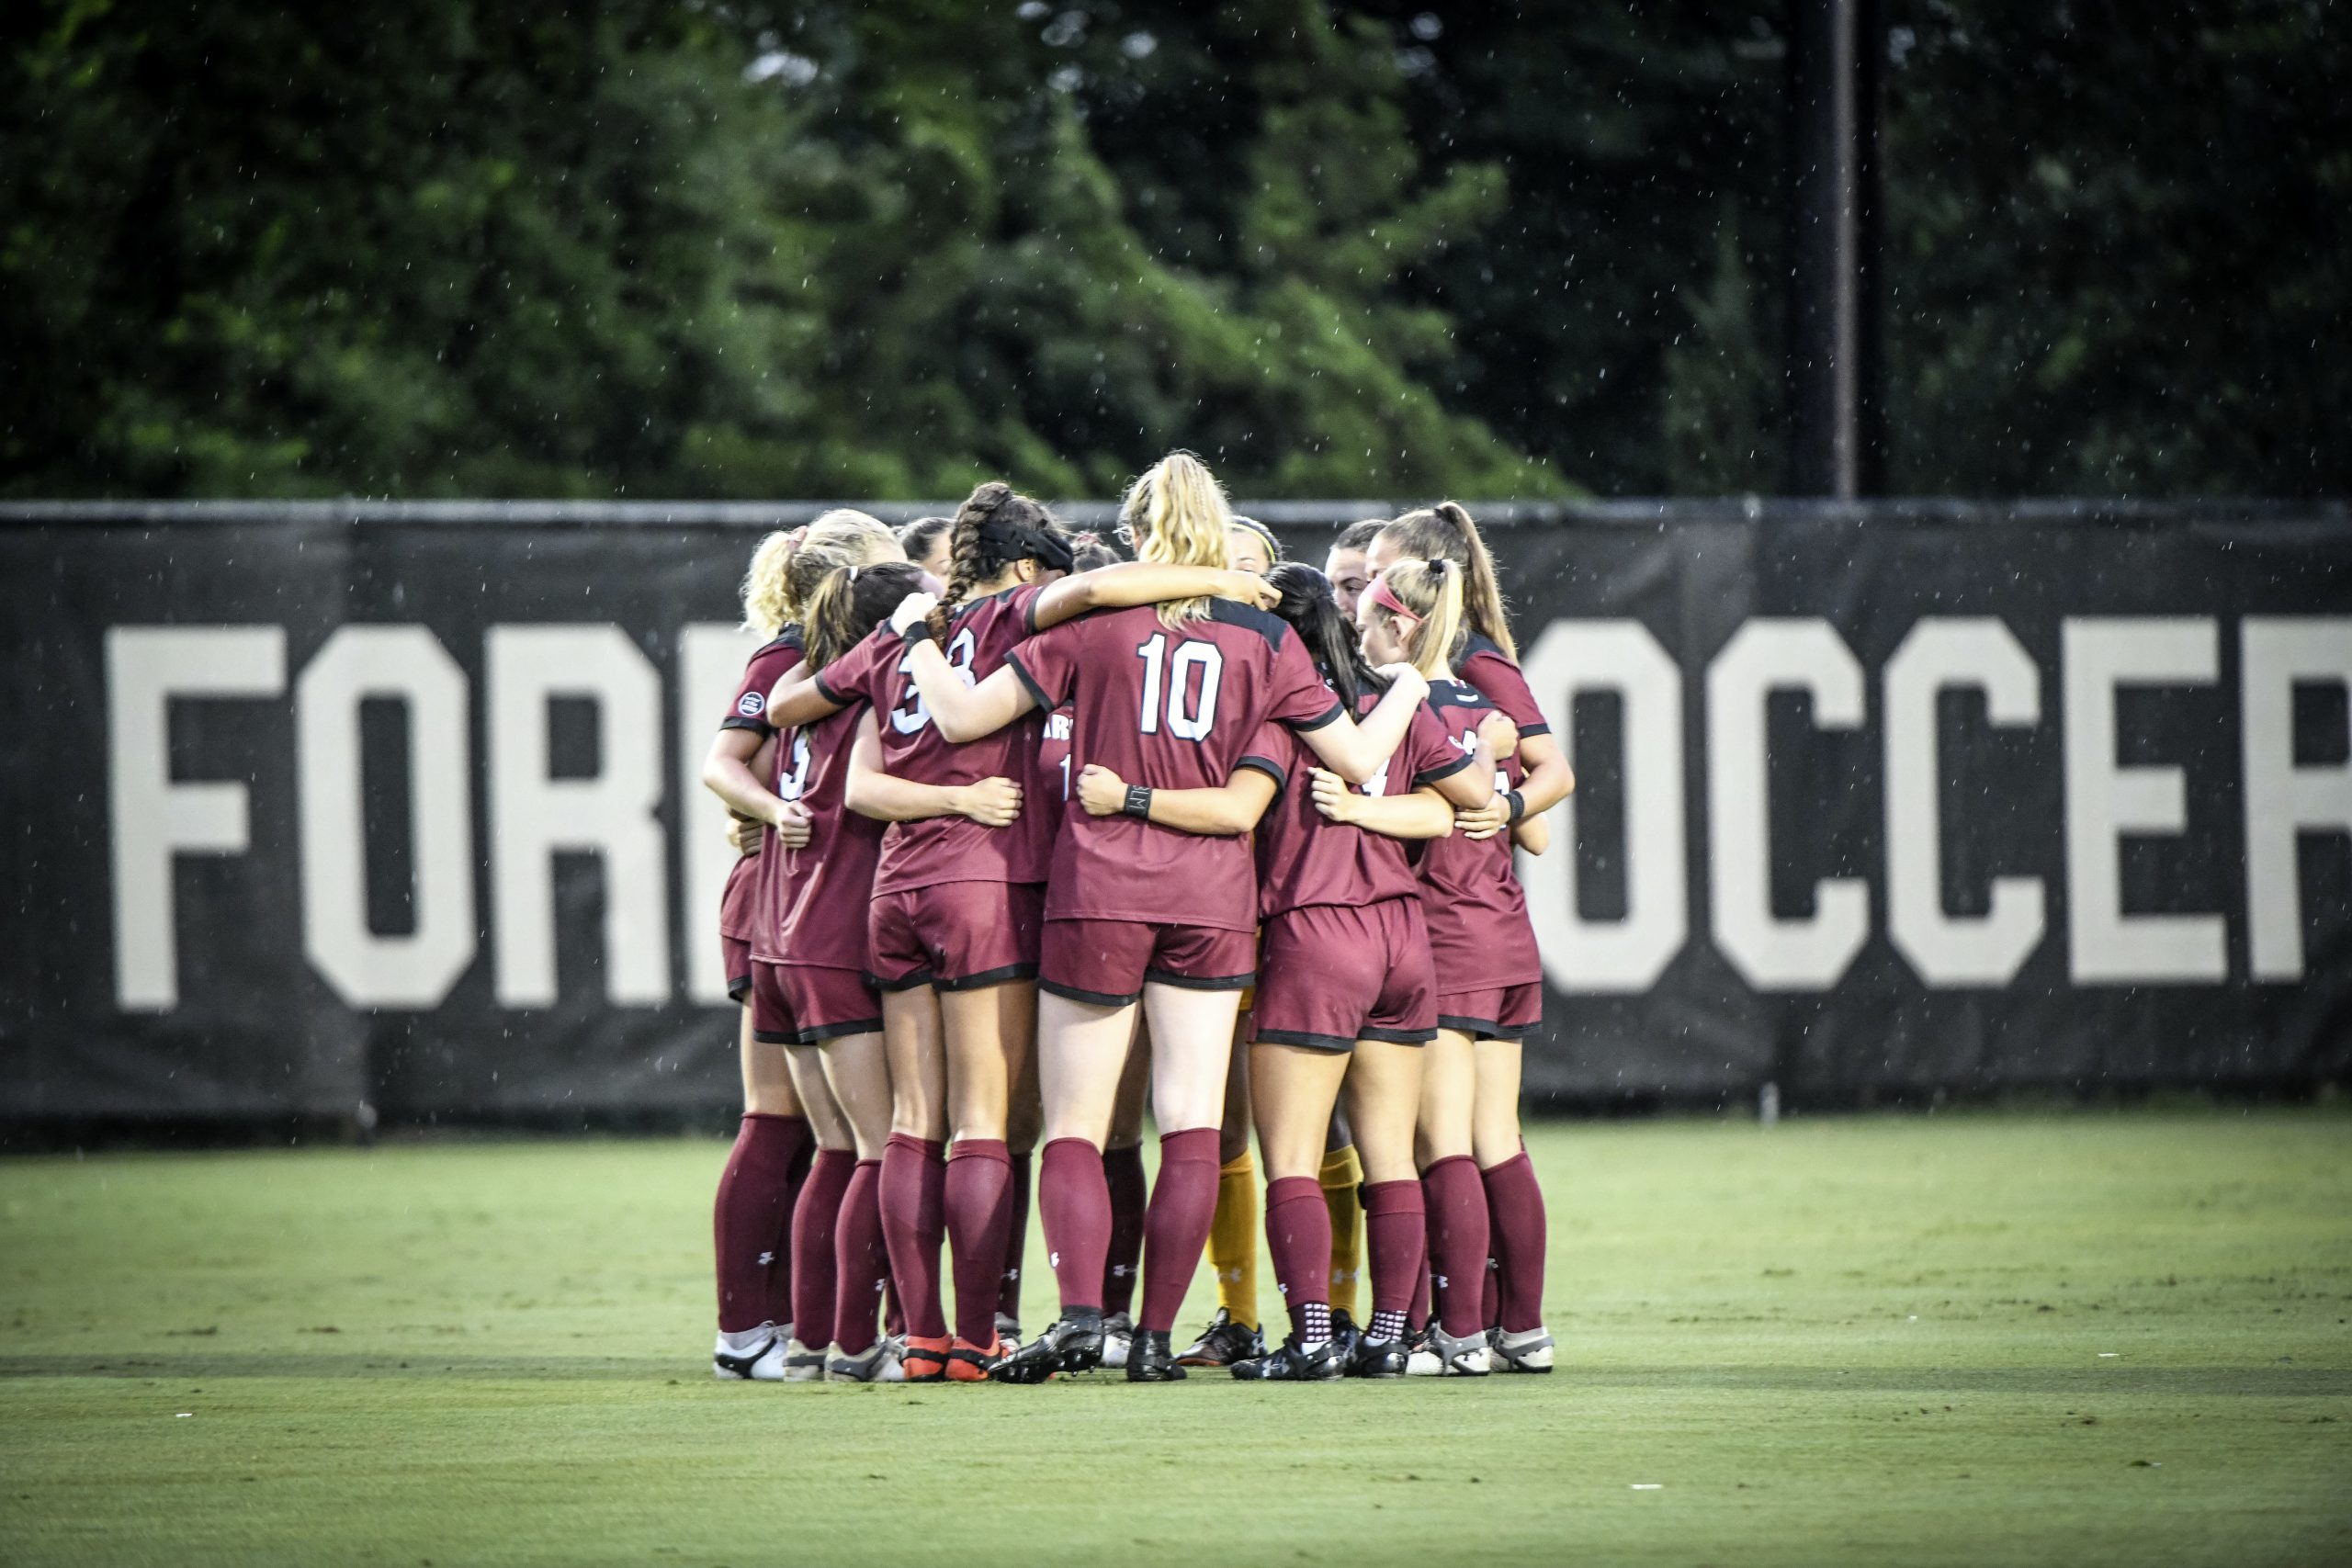 The USC women’s soccer starting lineup for 2021 huddles before their win Aug. 12 at Wake Forest. Heather Hinz, Luciana Zullo, Camryn Dixon, Catherine Barry, Abby Hugo, Ryan Gareis, Samantha Chang, Lauren Chang, Claire Griffiths, Jyllissa Harris, Sarah Eskew